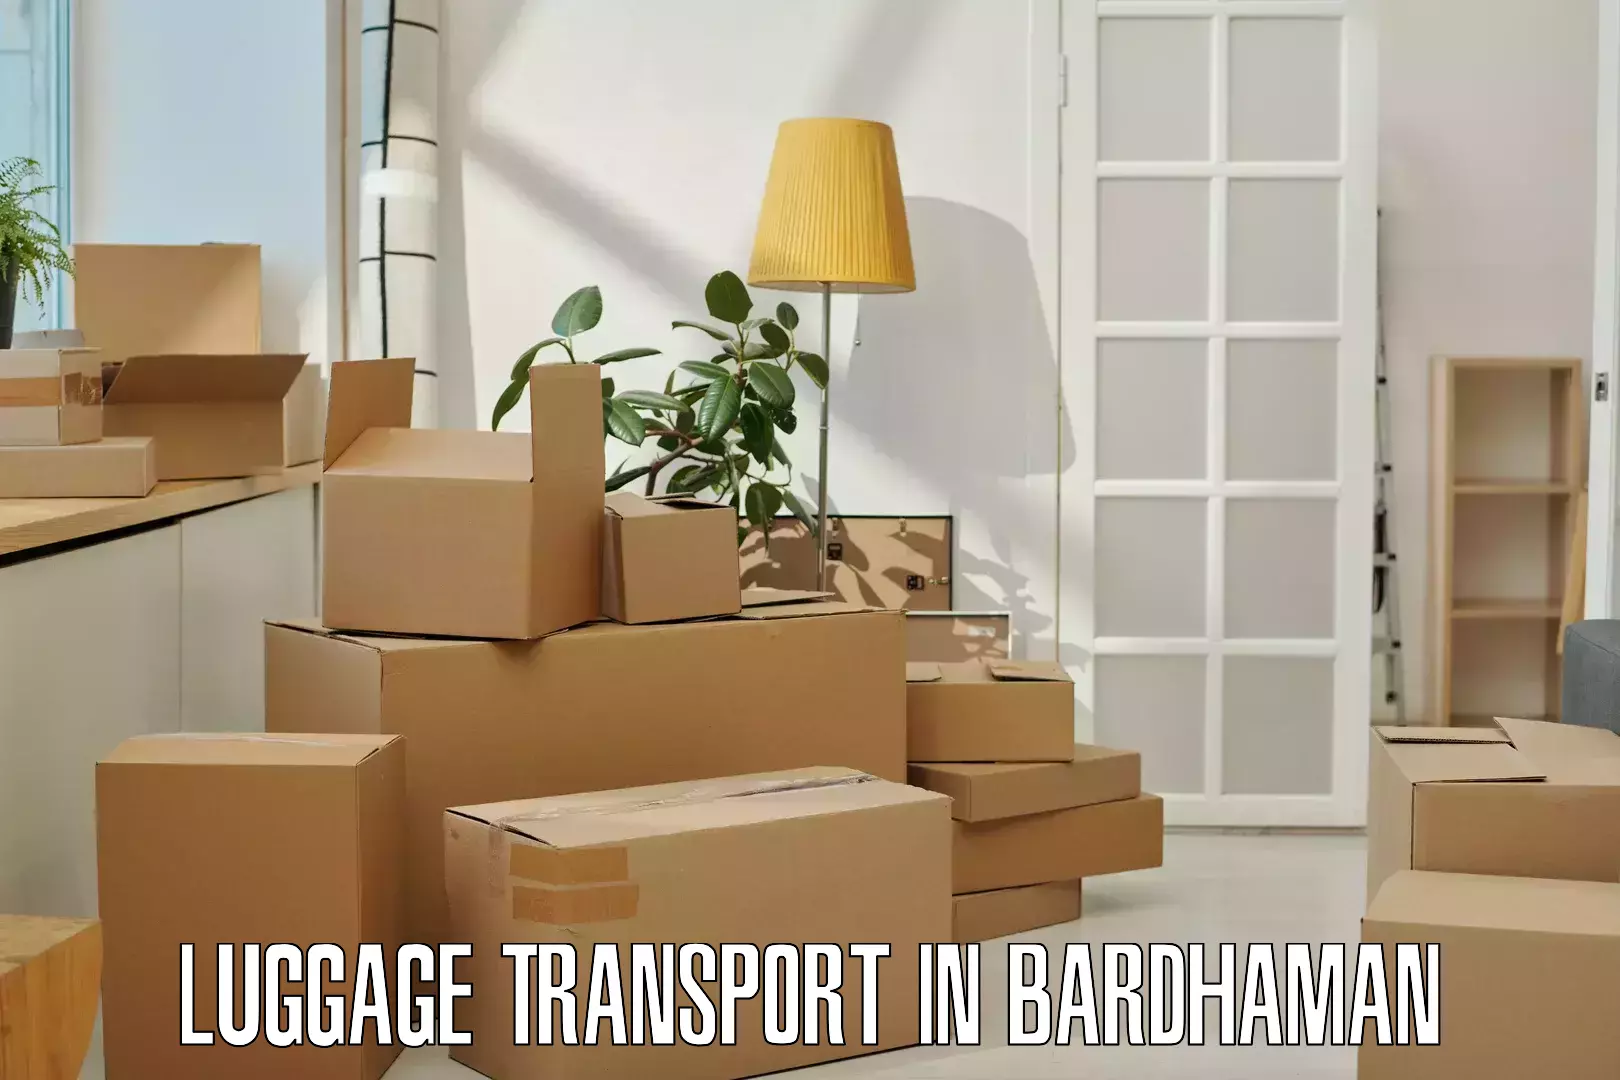 Automated luggage transport in Bardhaman